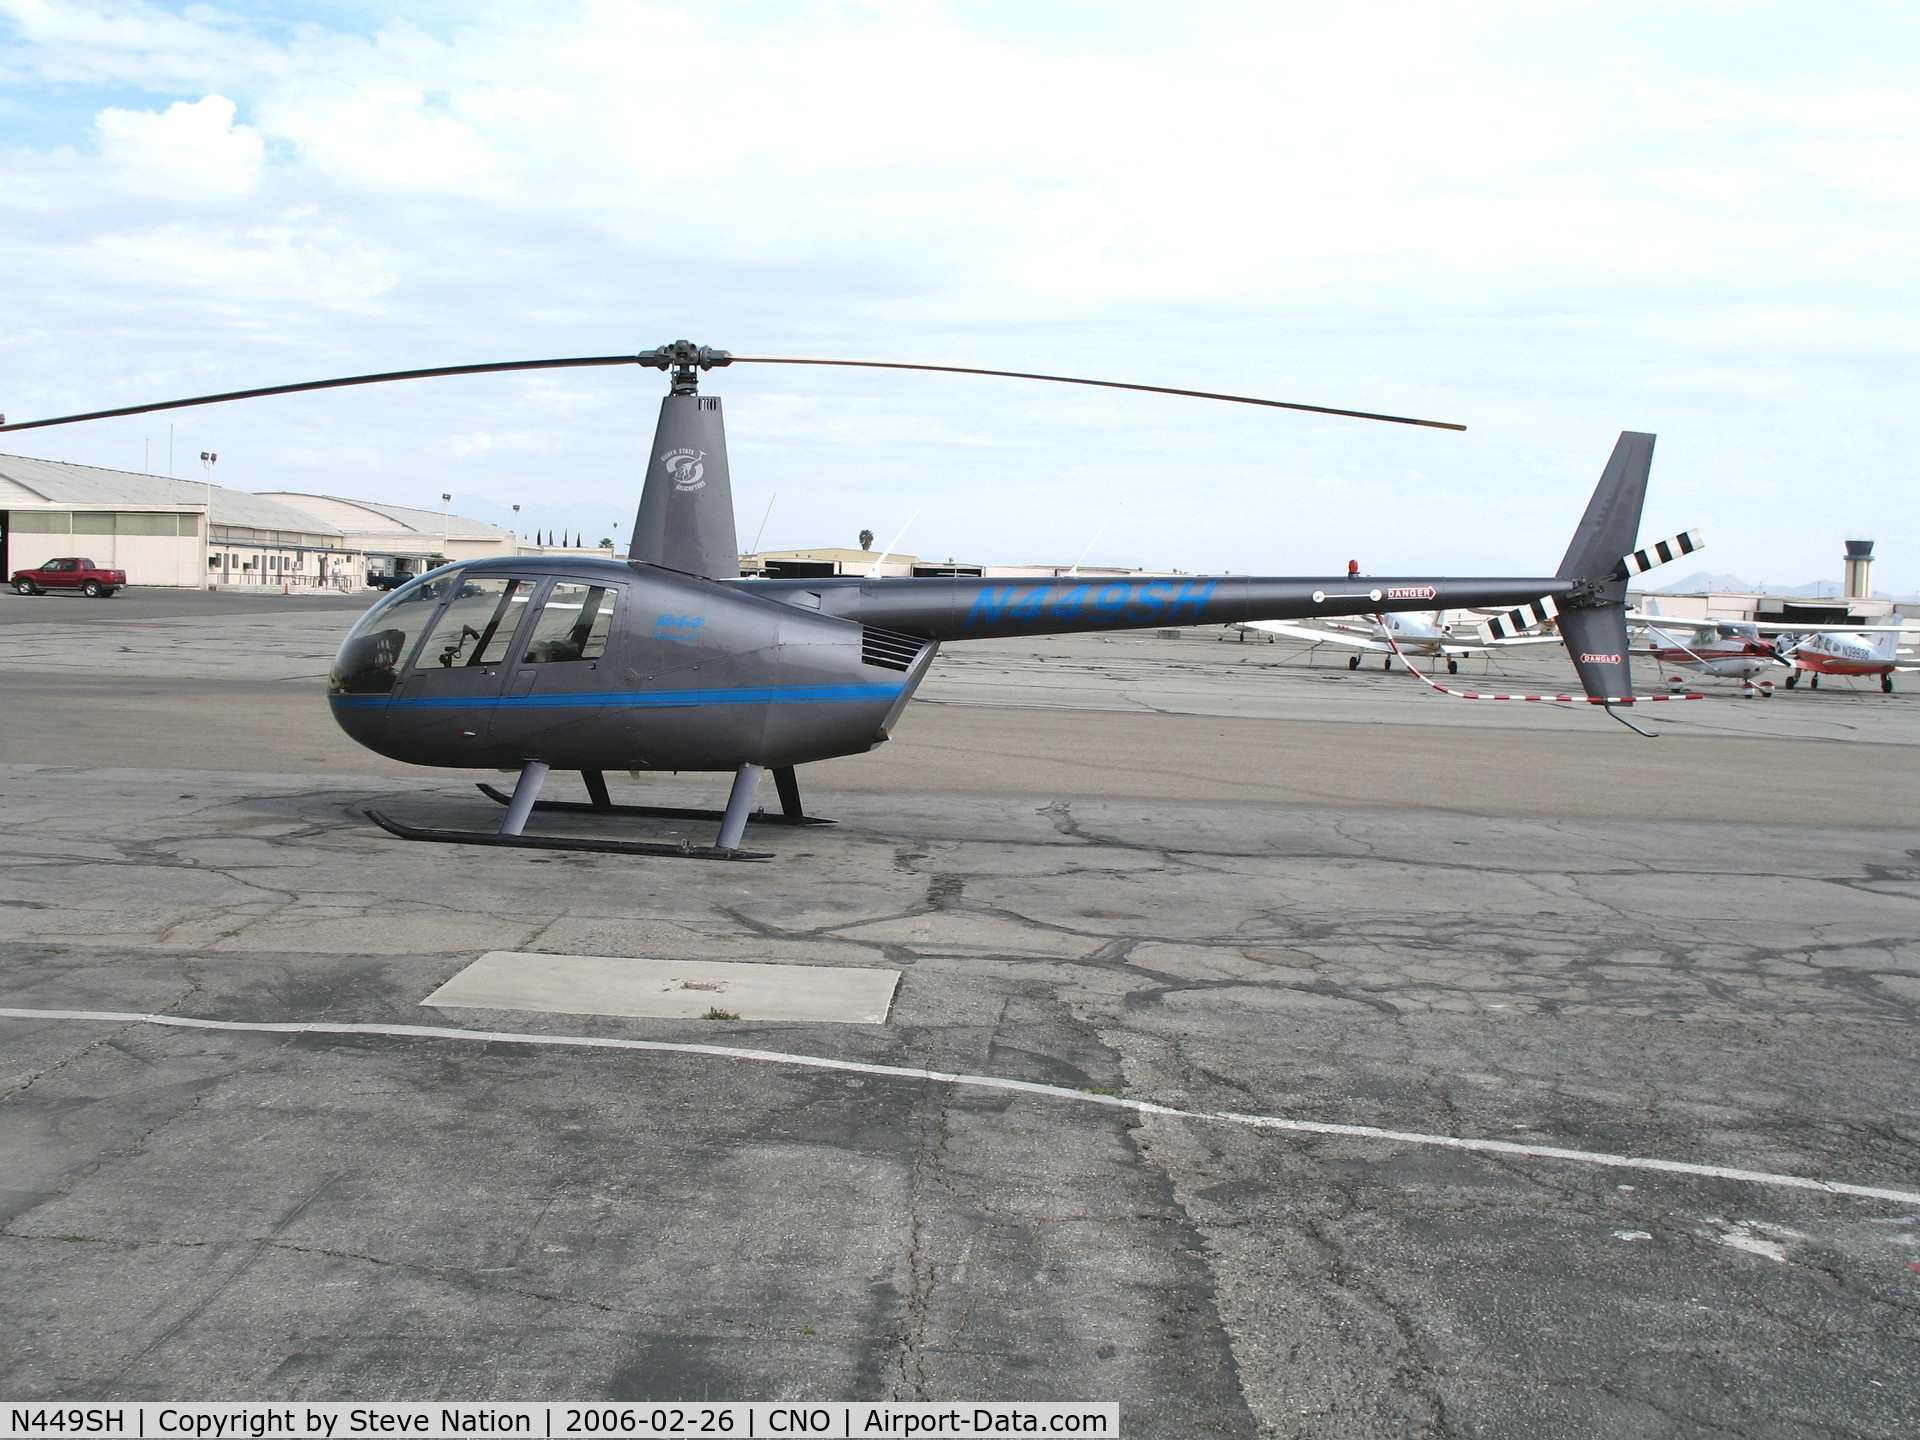 N449SH, 2005 Robinson R44 II C/N 10627, Silver State Helicopters 2005 Robinson R-44 II at Chino, CA